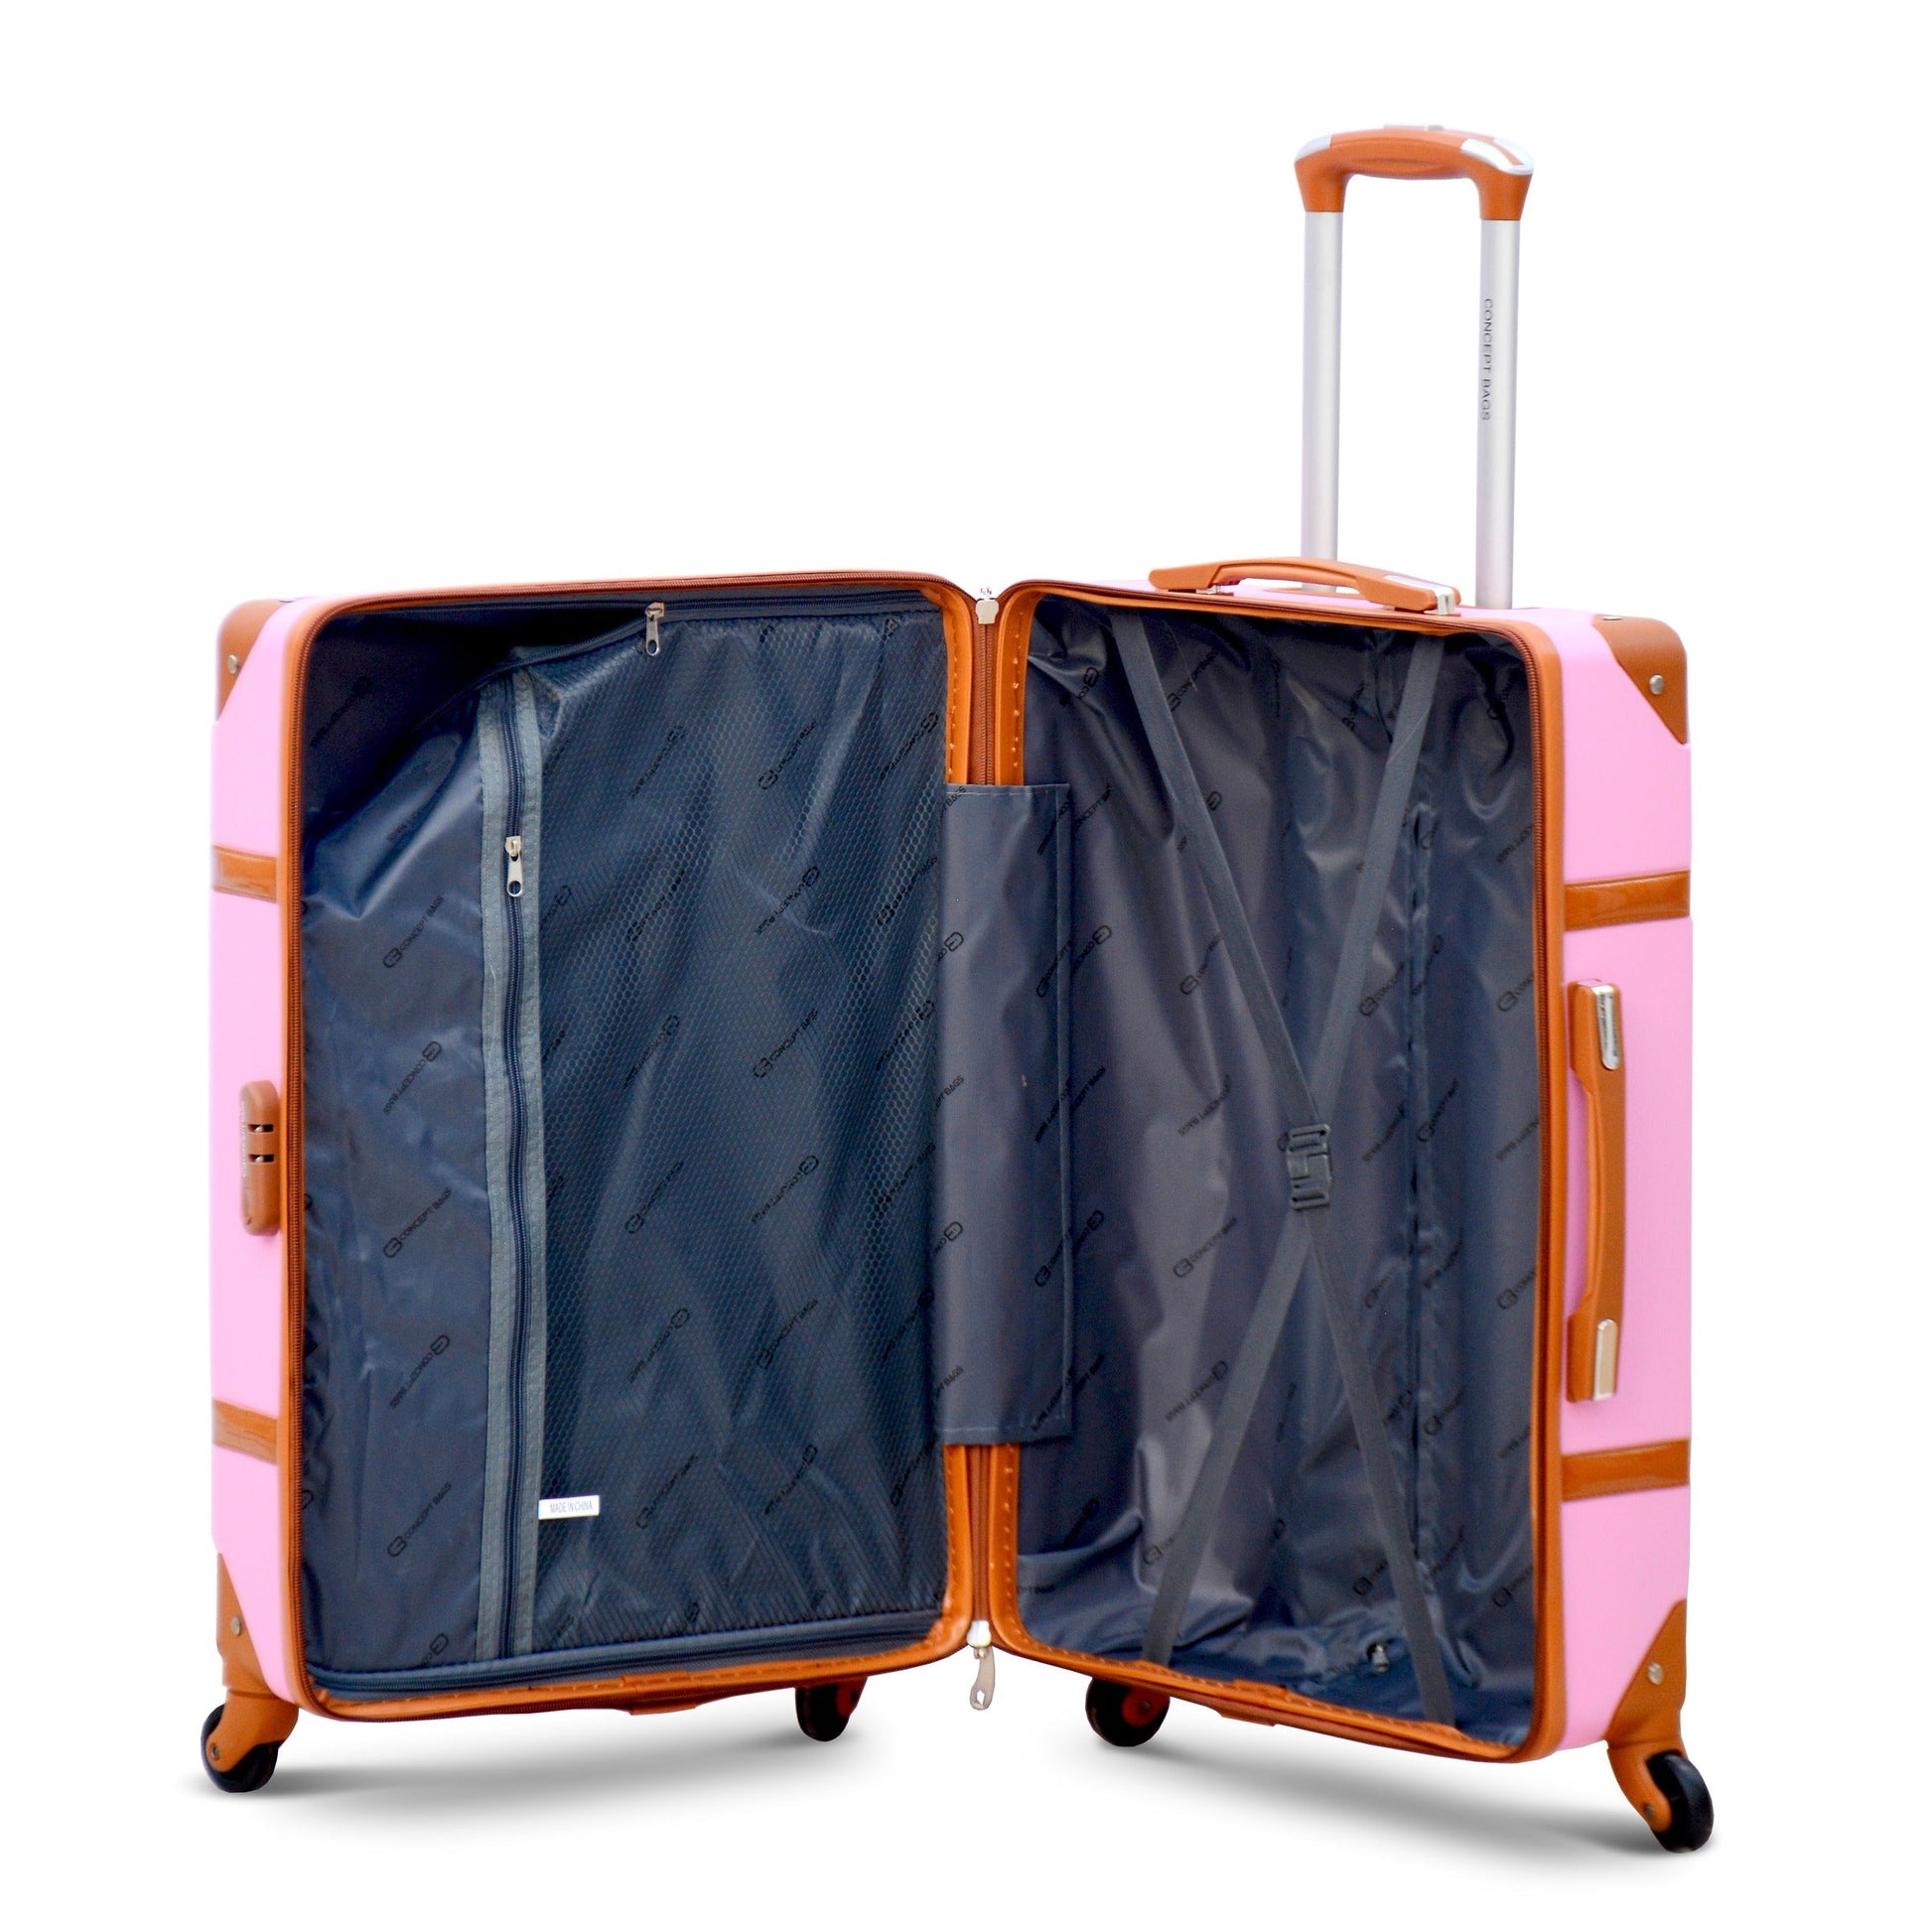 Corner guard lightweight 28 inch low price pink colour luggage interior